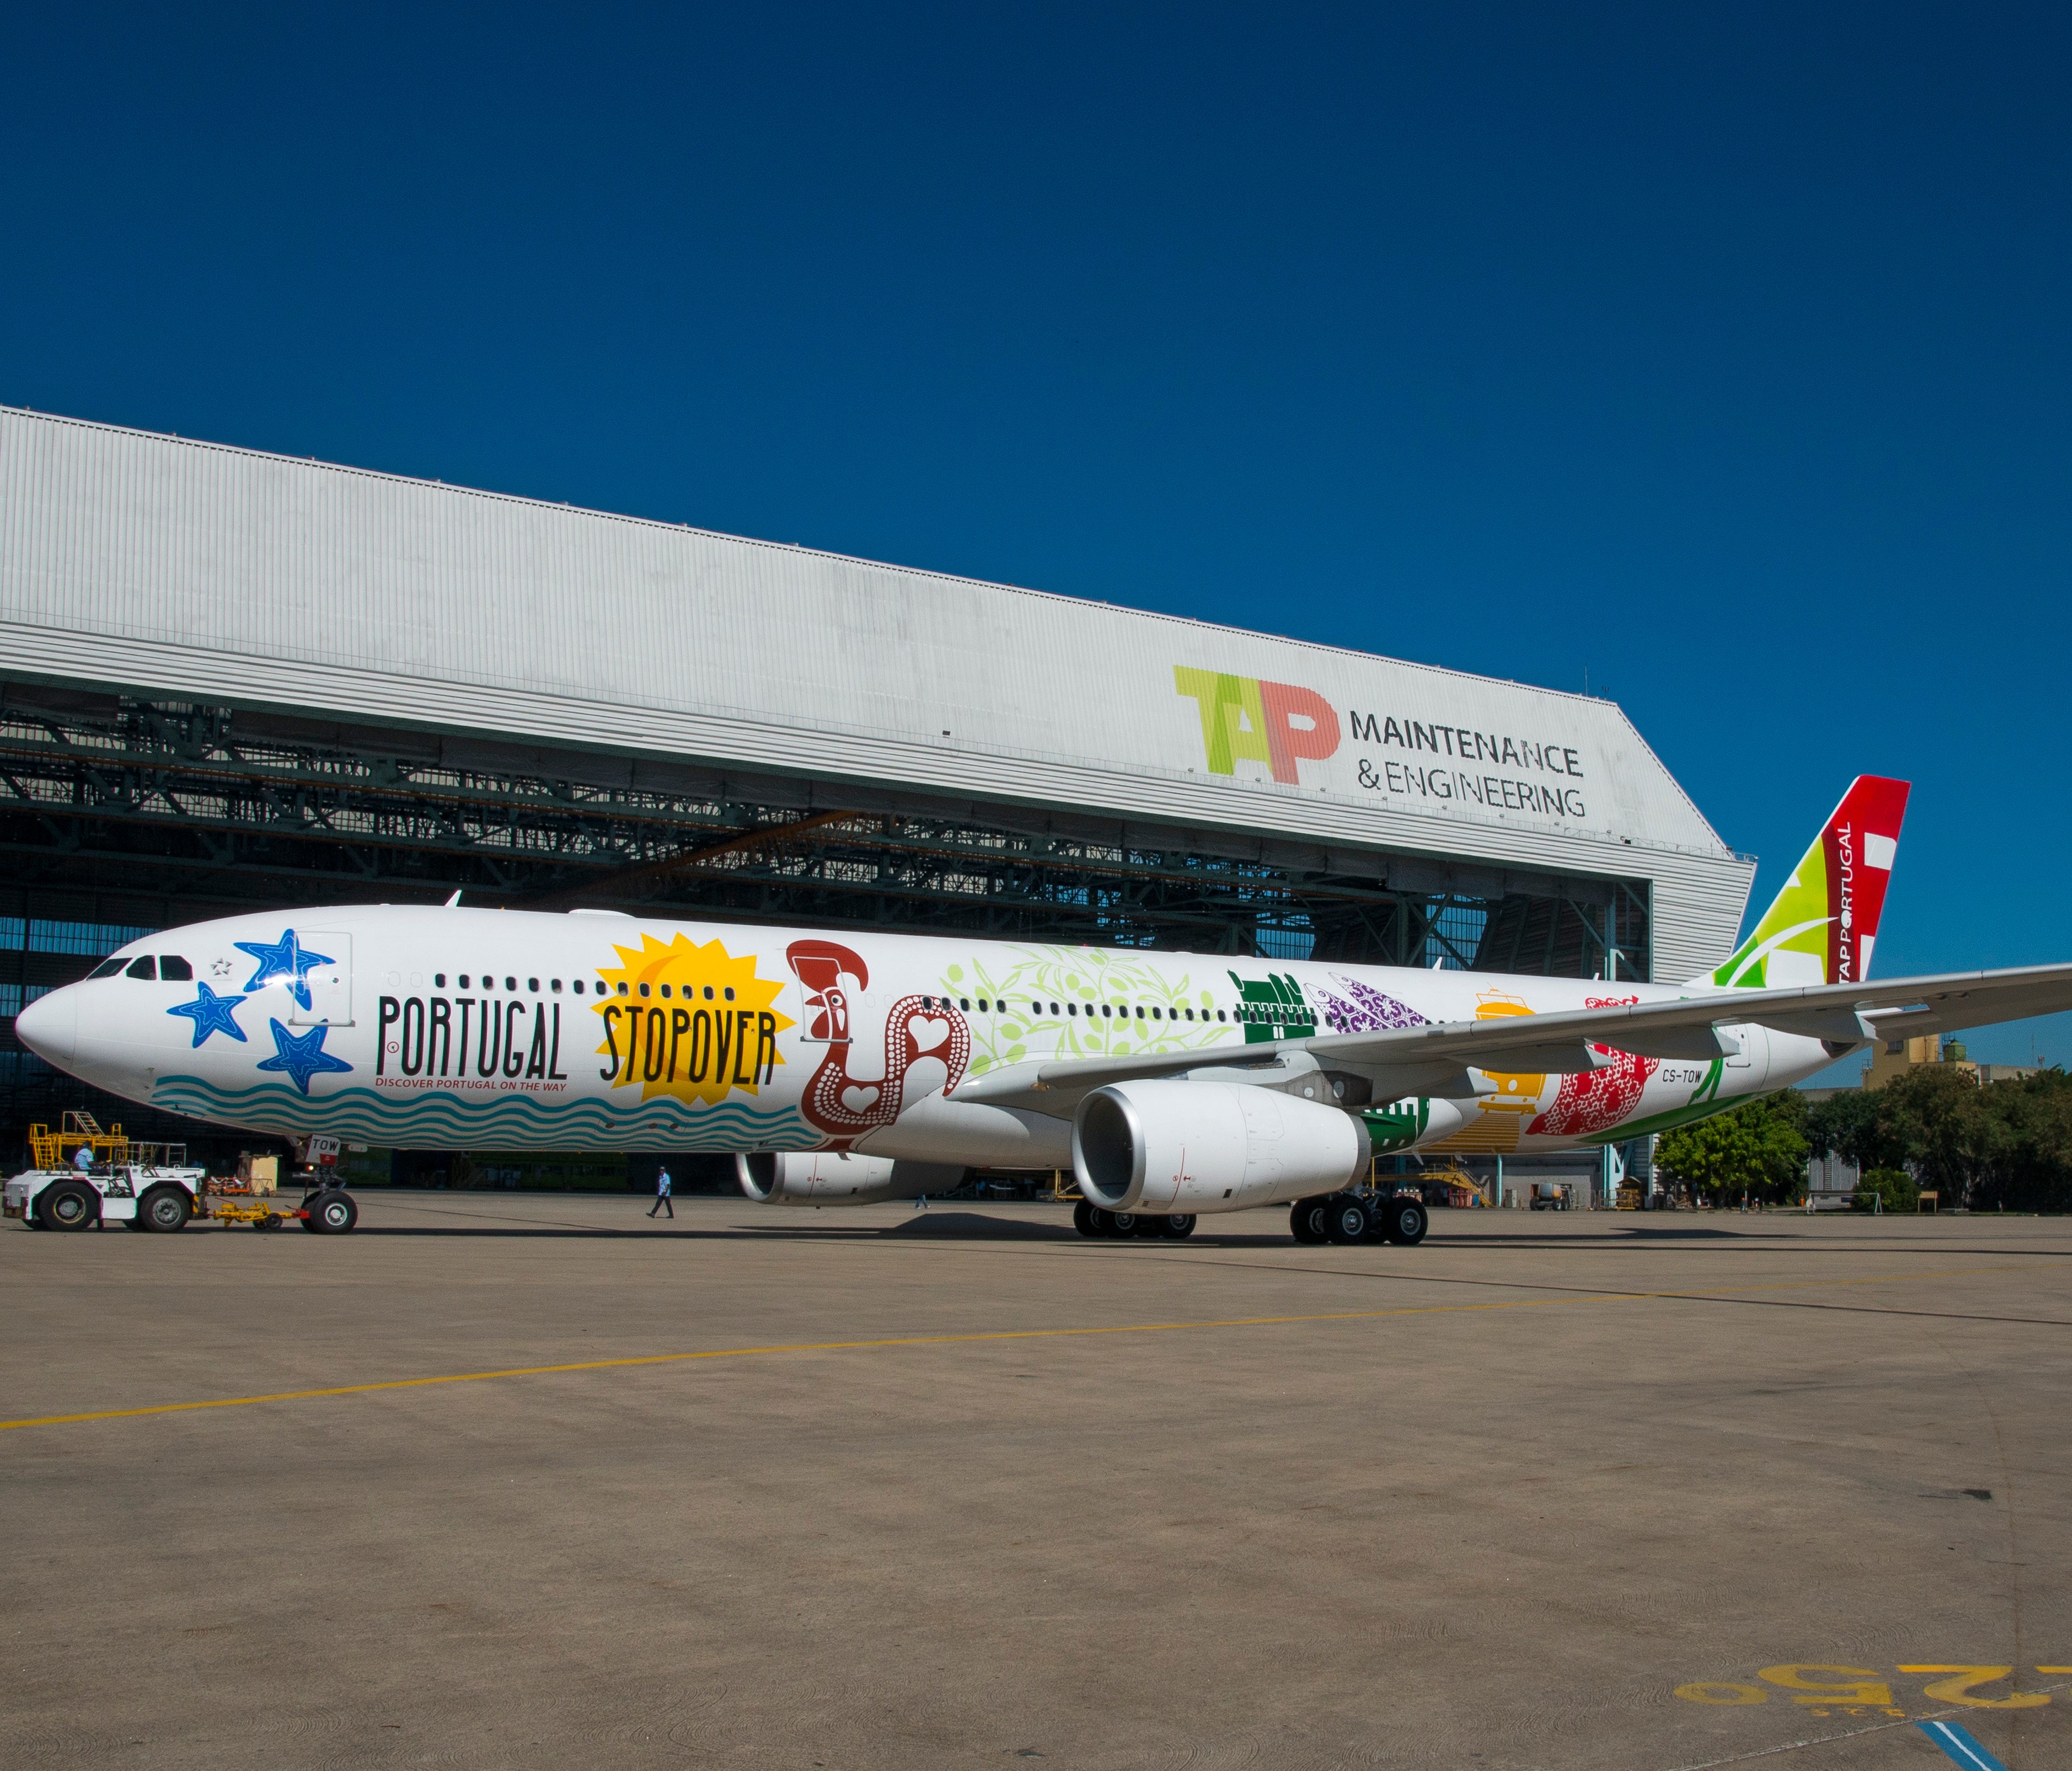 TAP Air Portugal unveiled this special livery to promote its 'stopover program' for passengers connecting through its bases in Lisbon and Porto.